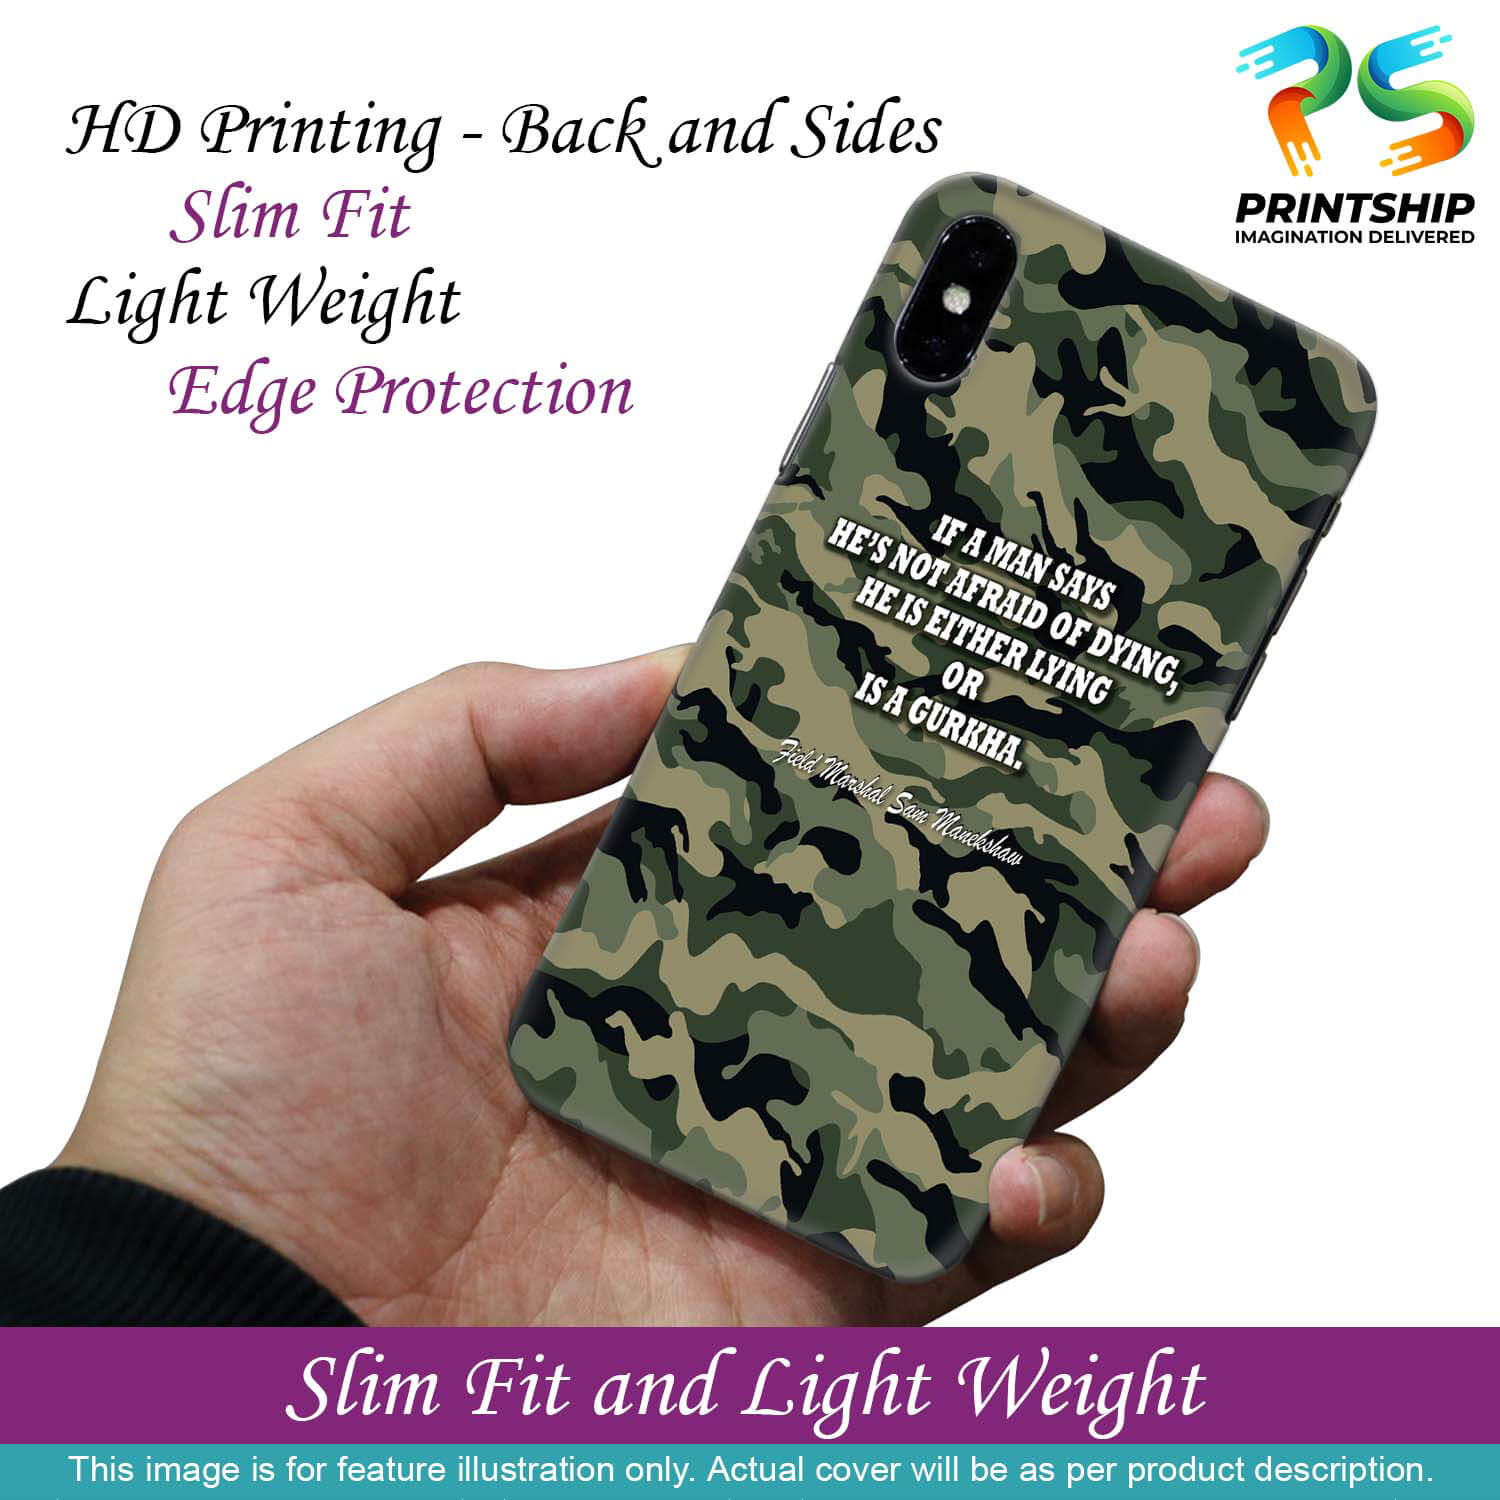 W0450-Indian Army Quote Back Cover for Samsung Galaxy S9+ (Plus)